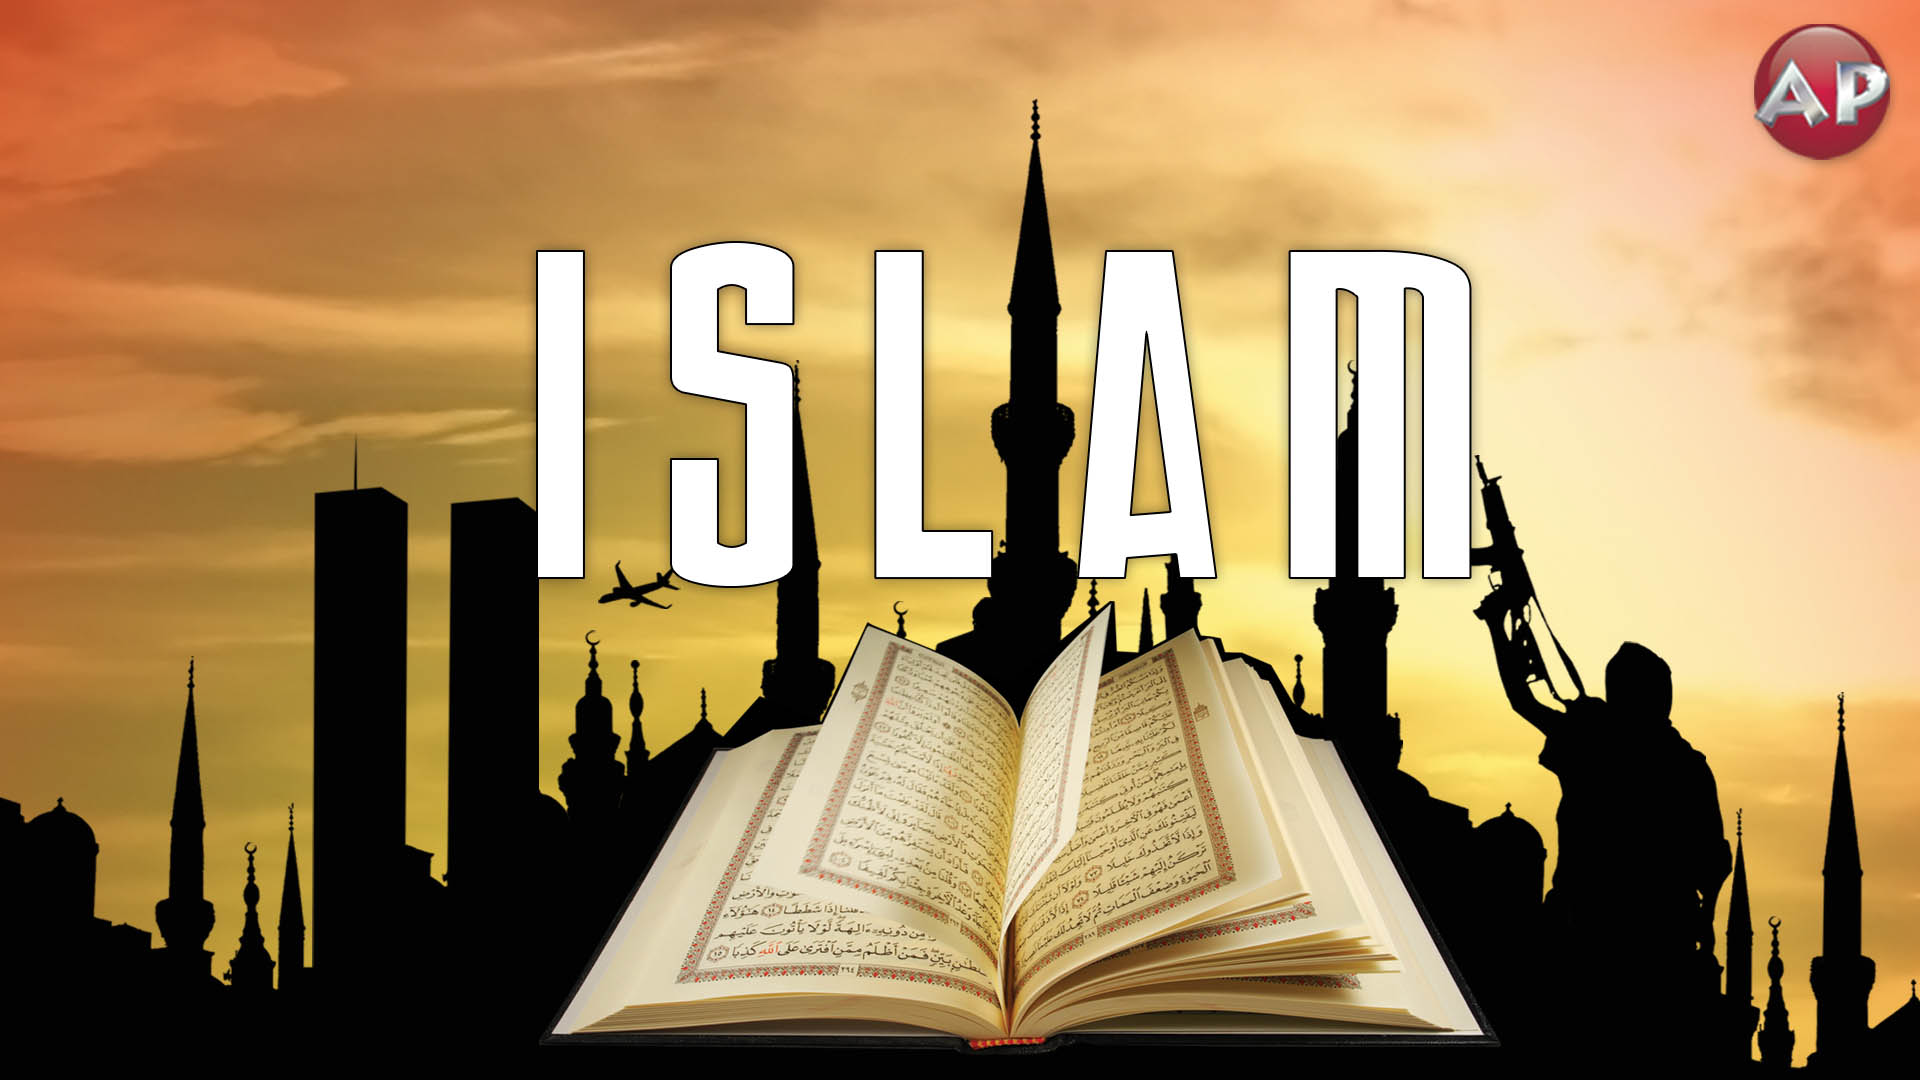 Islam, the Quran, and Christianity